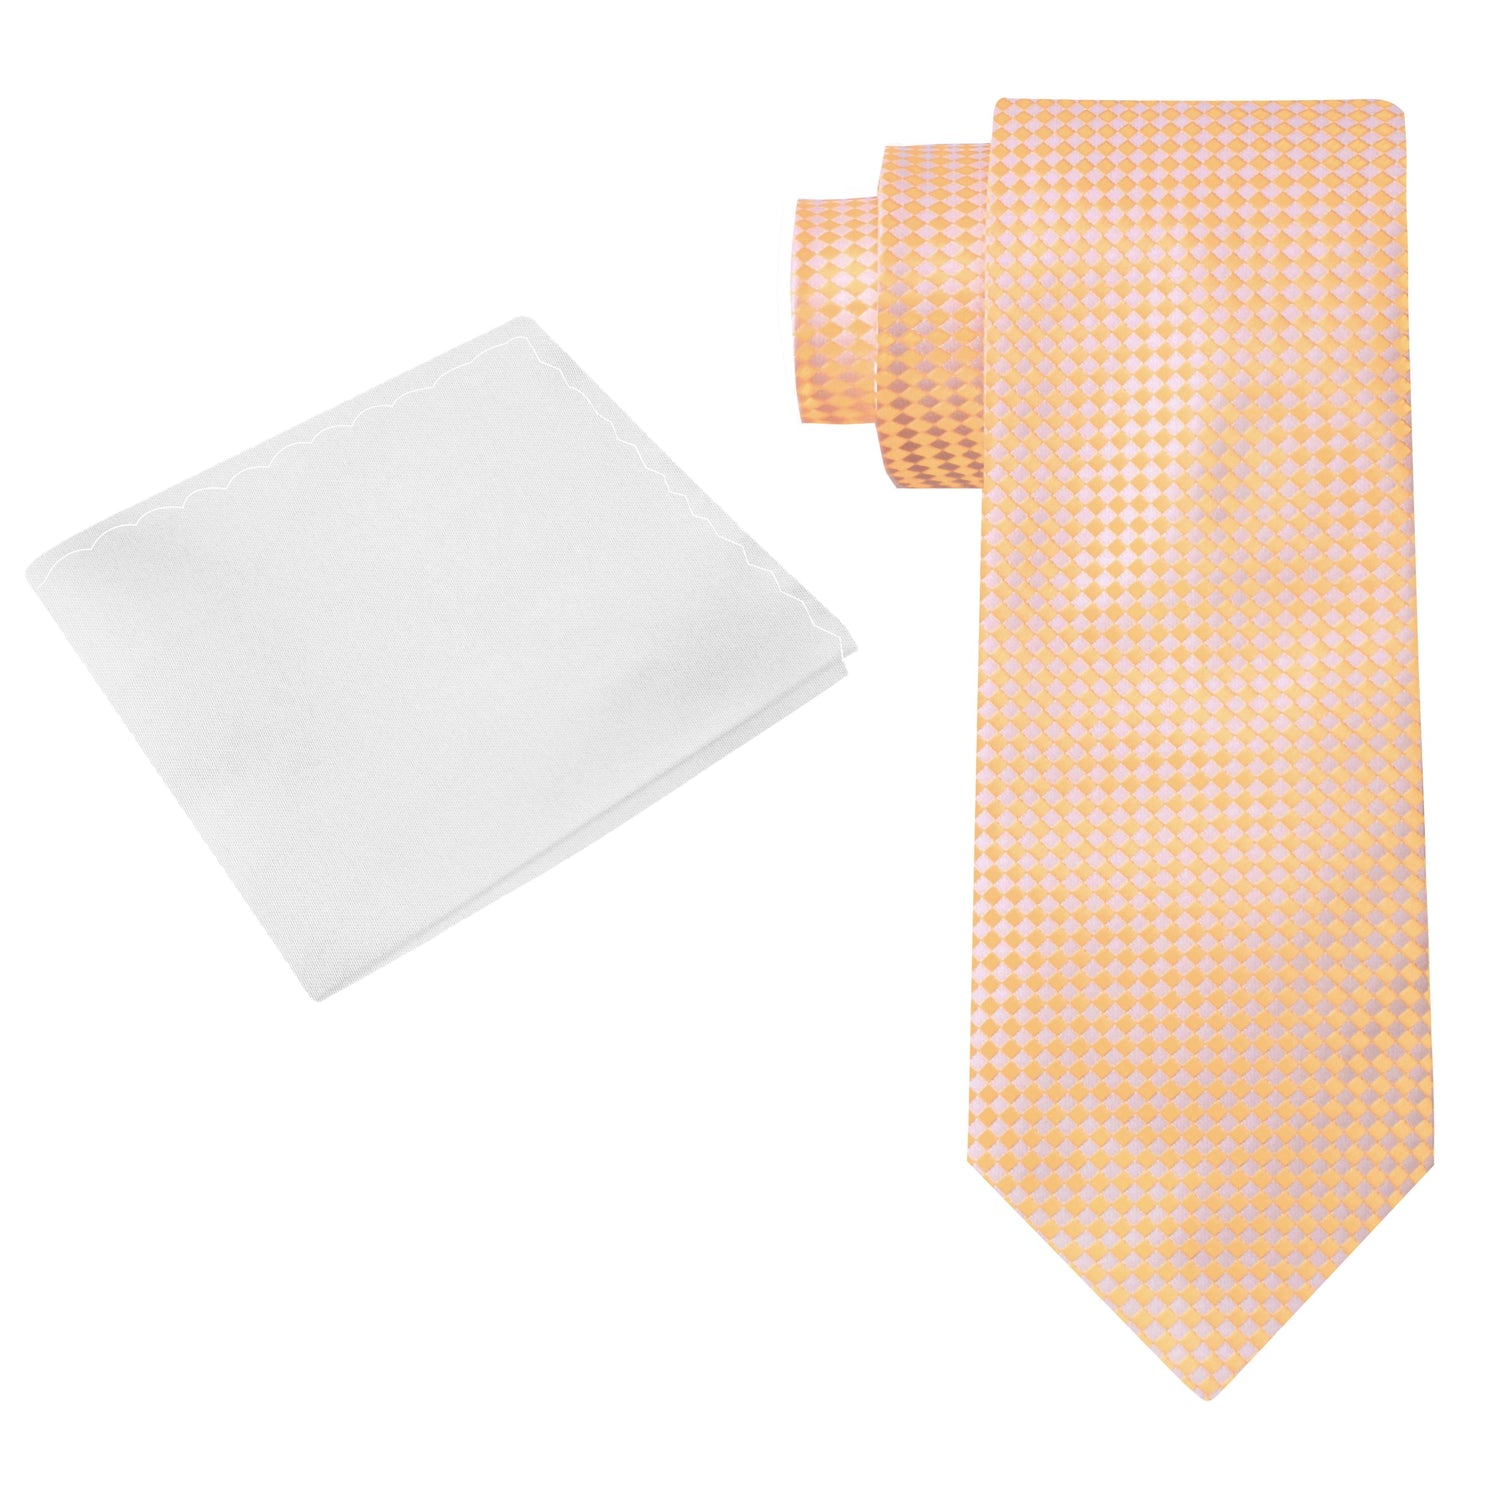 Alt View: Yellow Geometric Tie and White Square